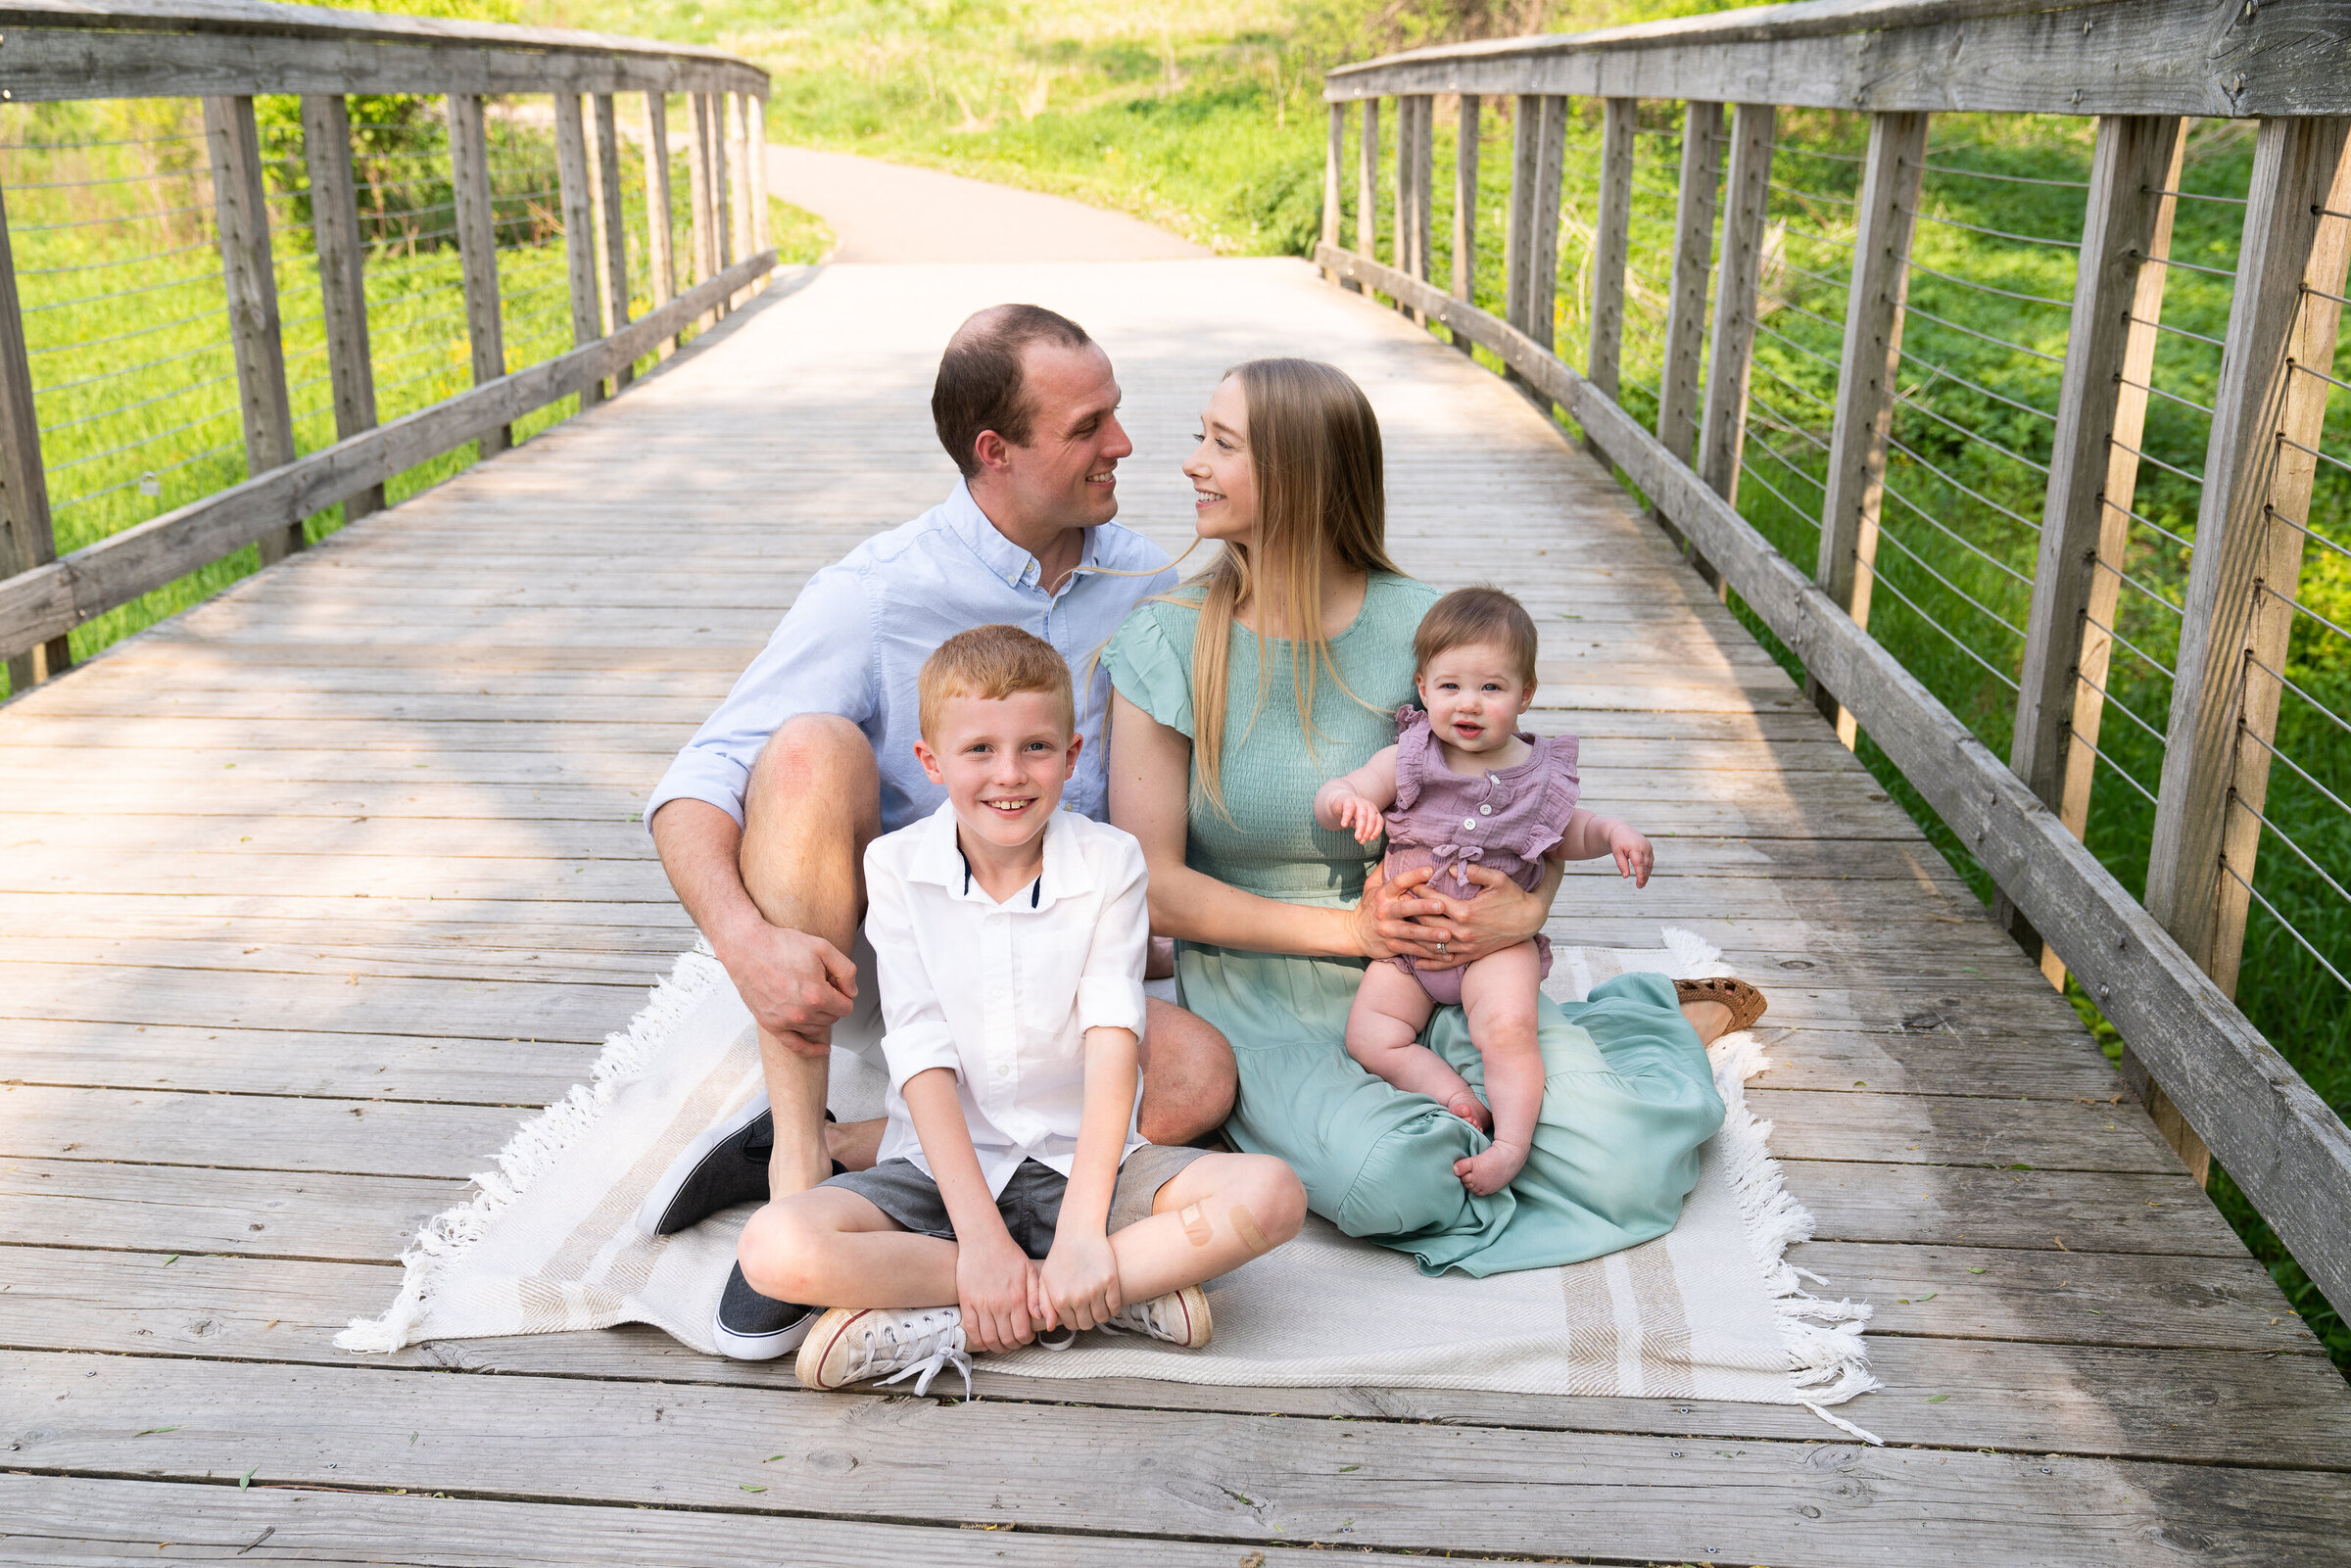 Outdoor family photography - Best Minneapolis family photographers - Twin Cities family photography